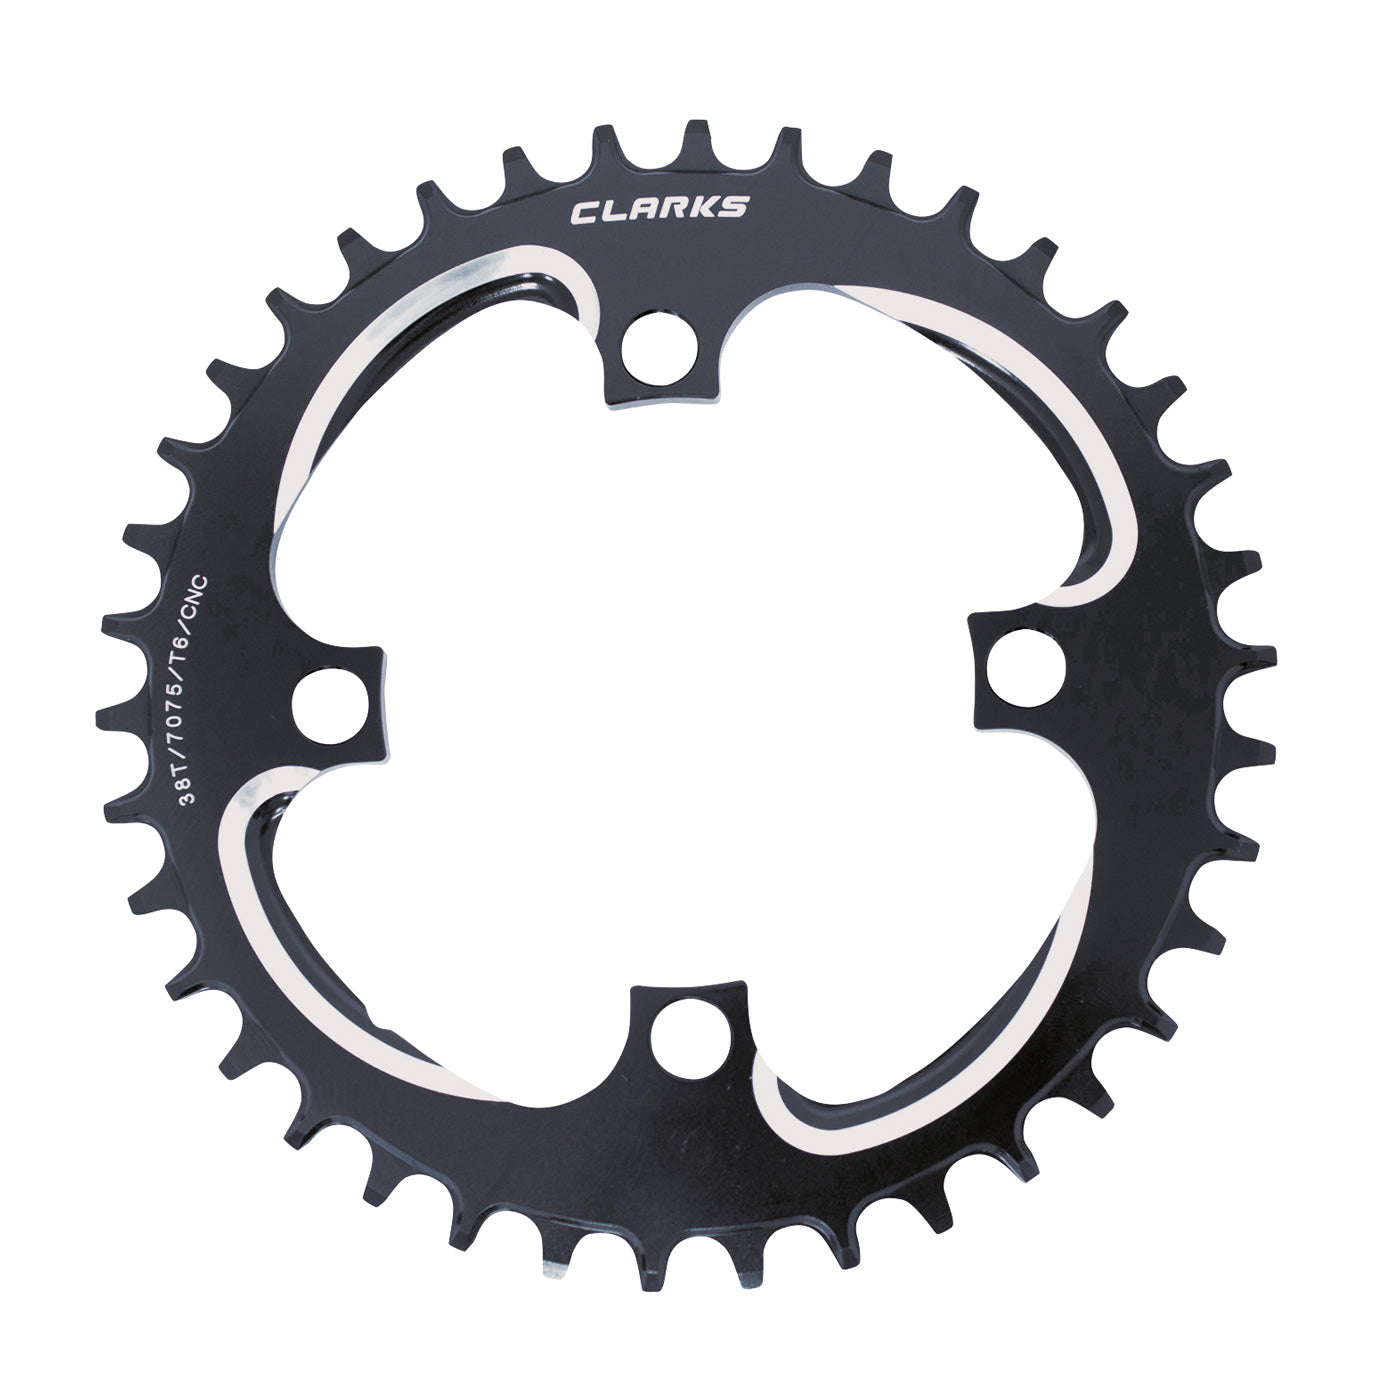 View 4 Bolt Alloy chainring 94BCD 38t information